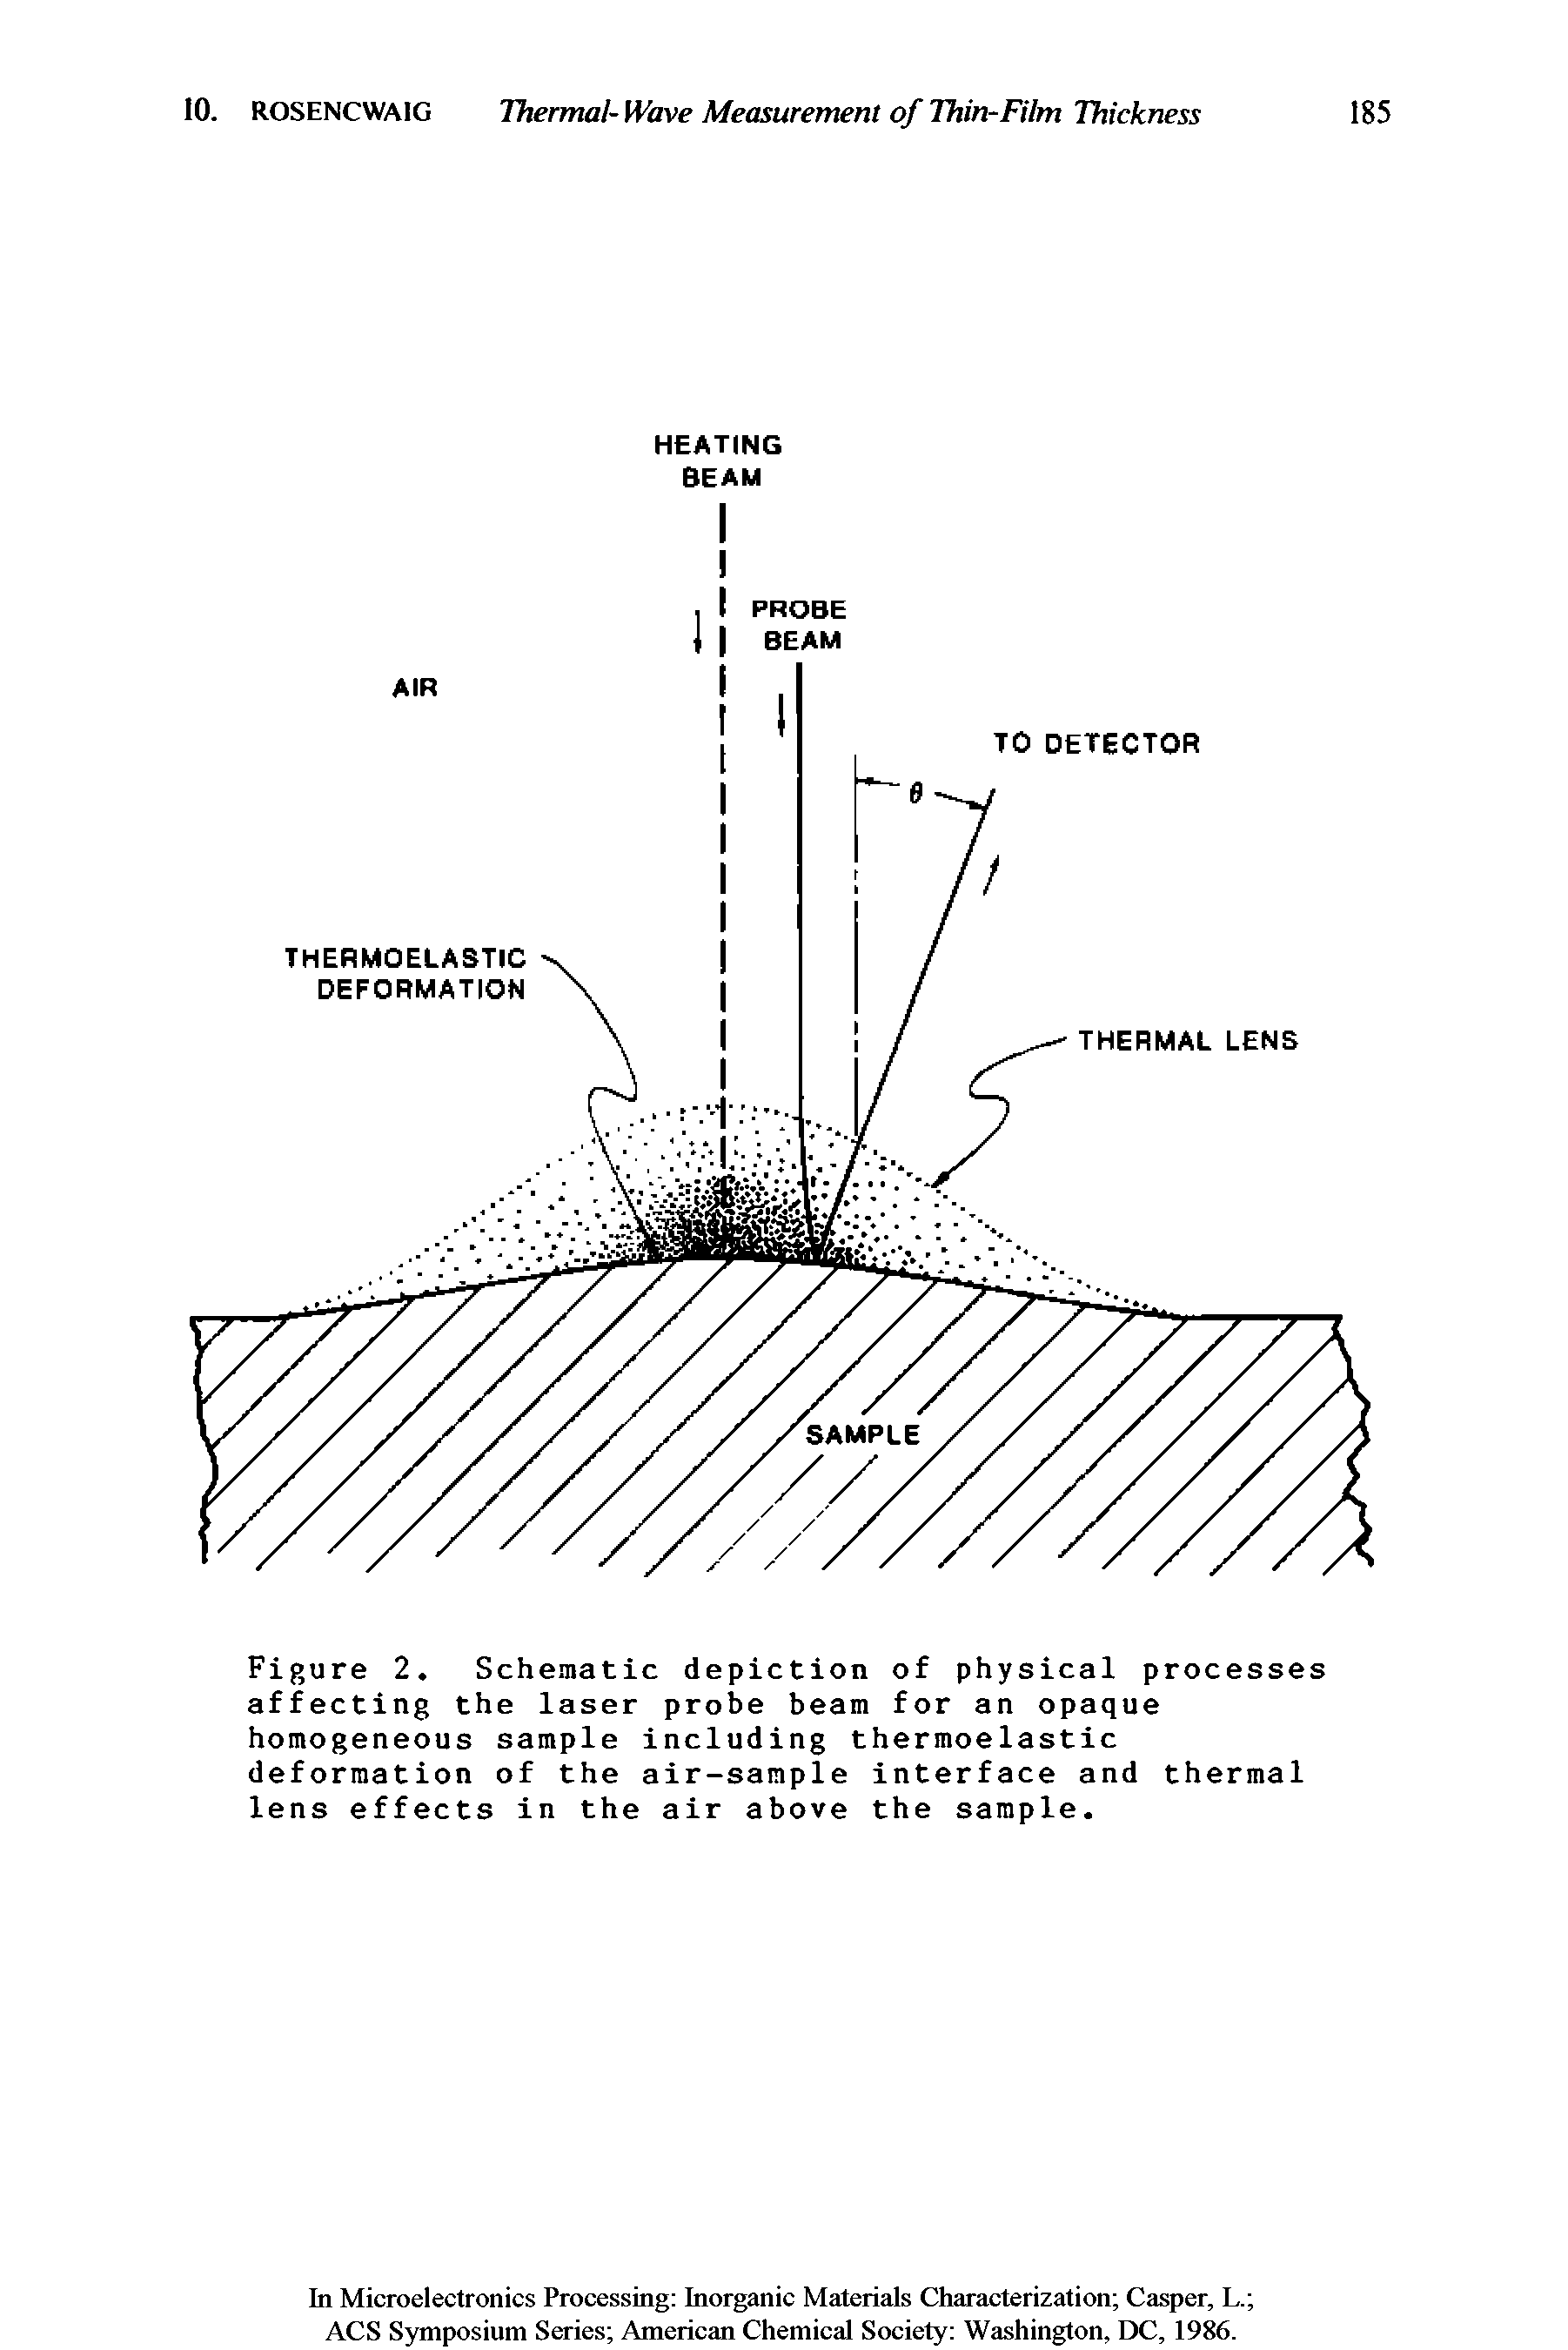 Figure 2. Schematic depiction of physical processes affecting the laser probe beam for an opaque homogeneous sample including thermoelastic deformation of the air-sample interface and thermal lens effects in the air above the sample.